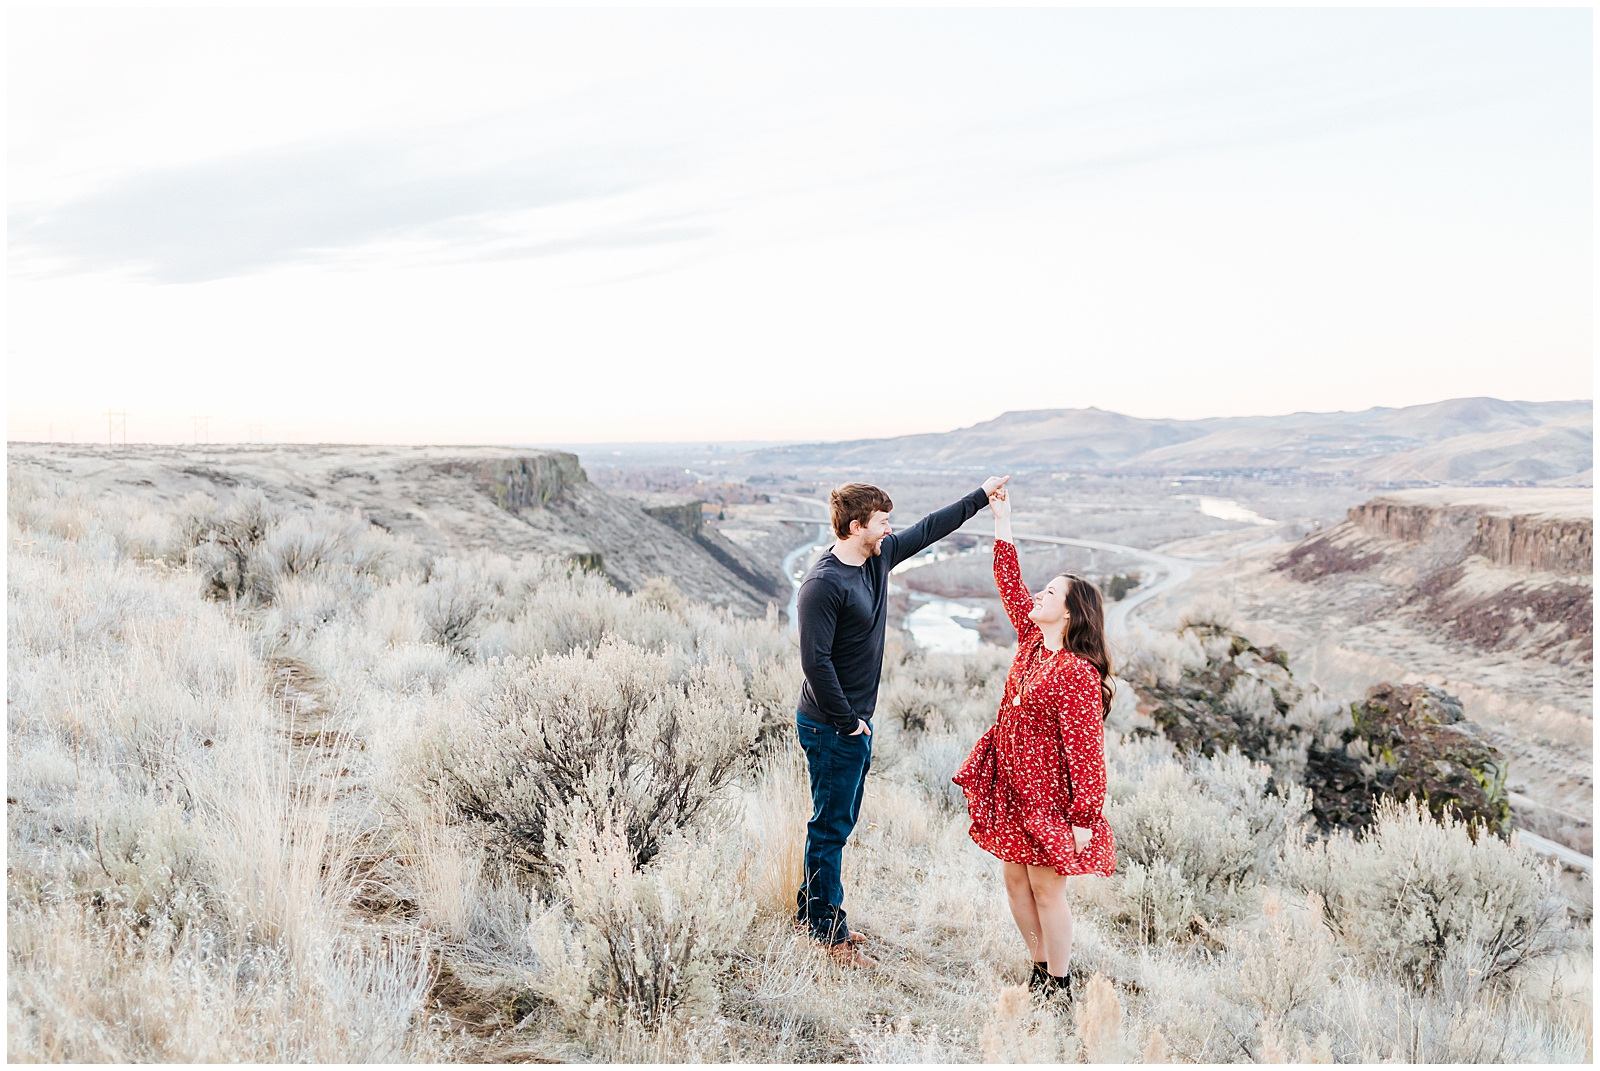 Boise Foothills Desert Engagement Twirling in front of valley